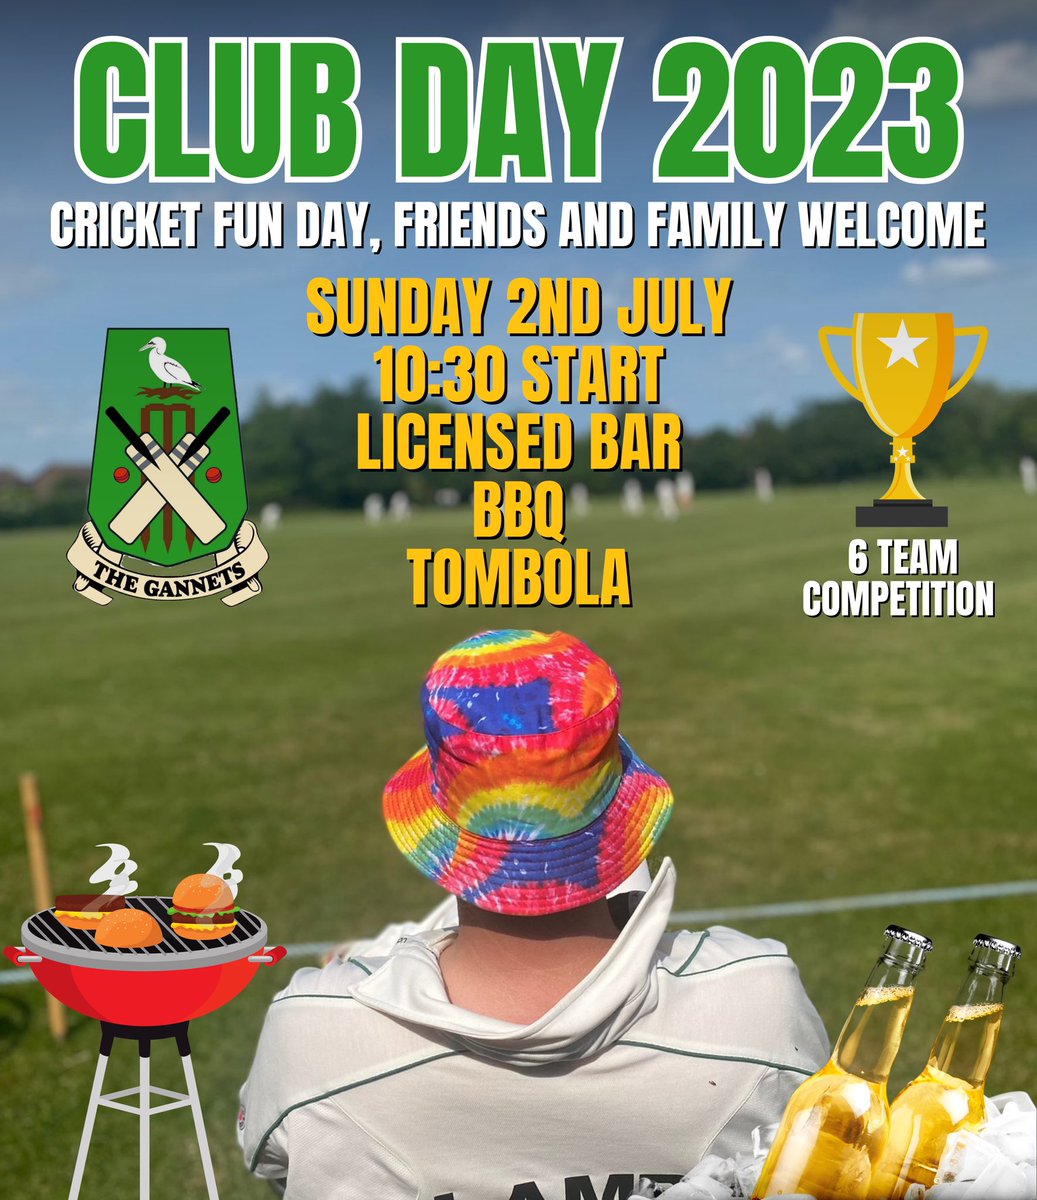 🏏 Club Day 2023 🏏

Come and join us on Sunday 2nd July 2023 for our annual fun day at Thorley Cricket Club 😁

⏰ 10:30 Start
🍻 Licensed Bar 
🔥 BBQ
🪅 Tombola 
🏆 6aside Cricket Competition 

Everyone welcome, see you all on Sunday 2nd July 🏏☀️